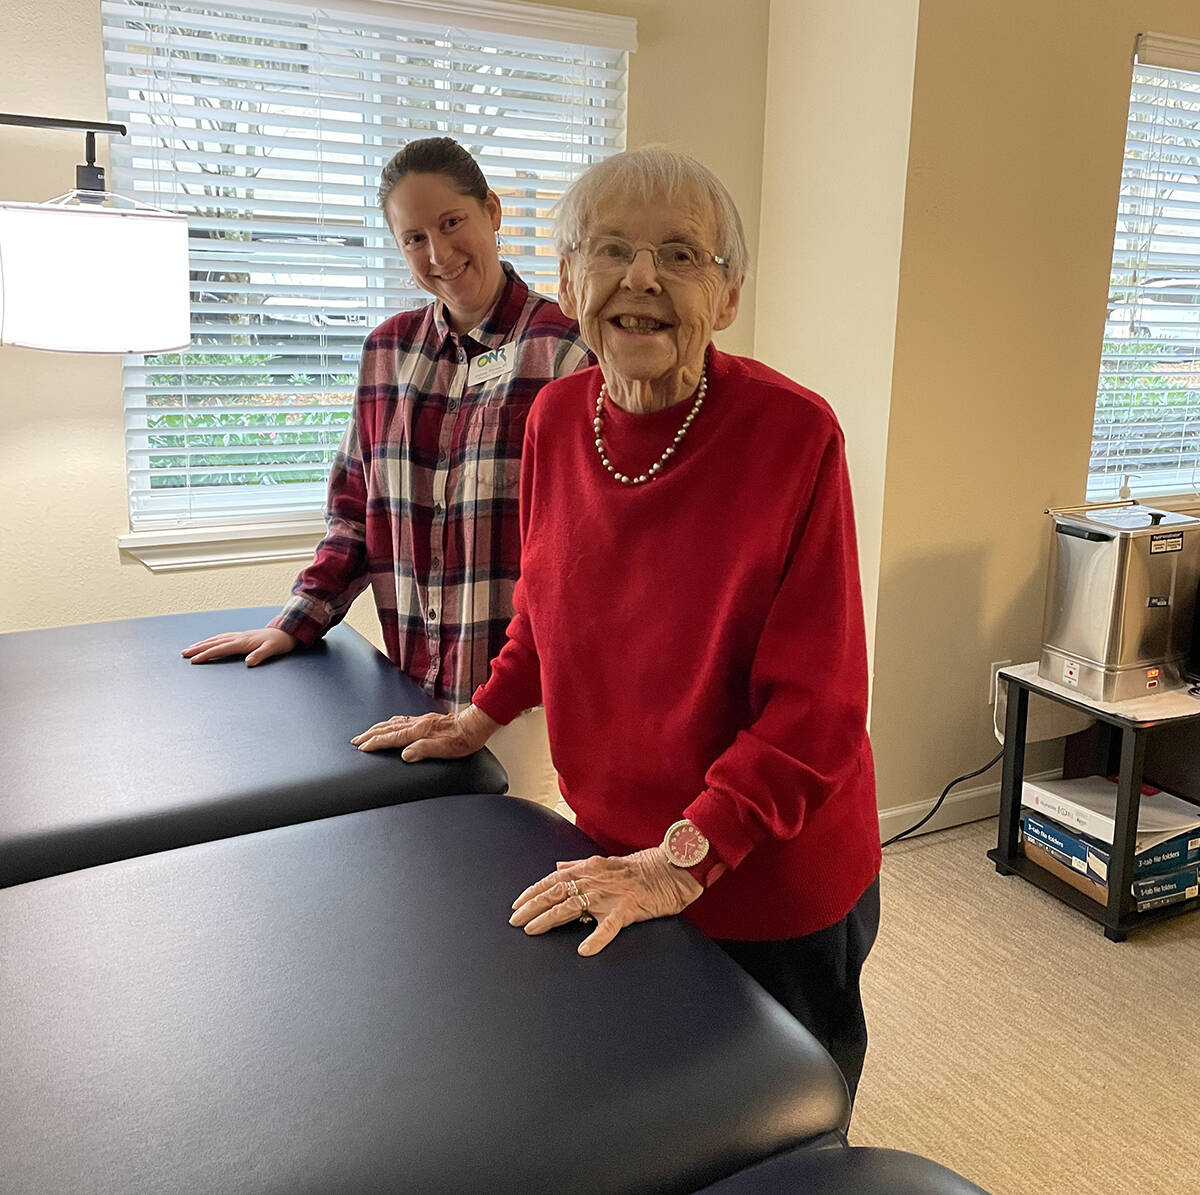 Island House resident Adah Edwards works on balance and strength exercises with Physical Therapist Chrissy Phillips. There are many advantages to having health professionals just down the hall!